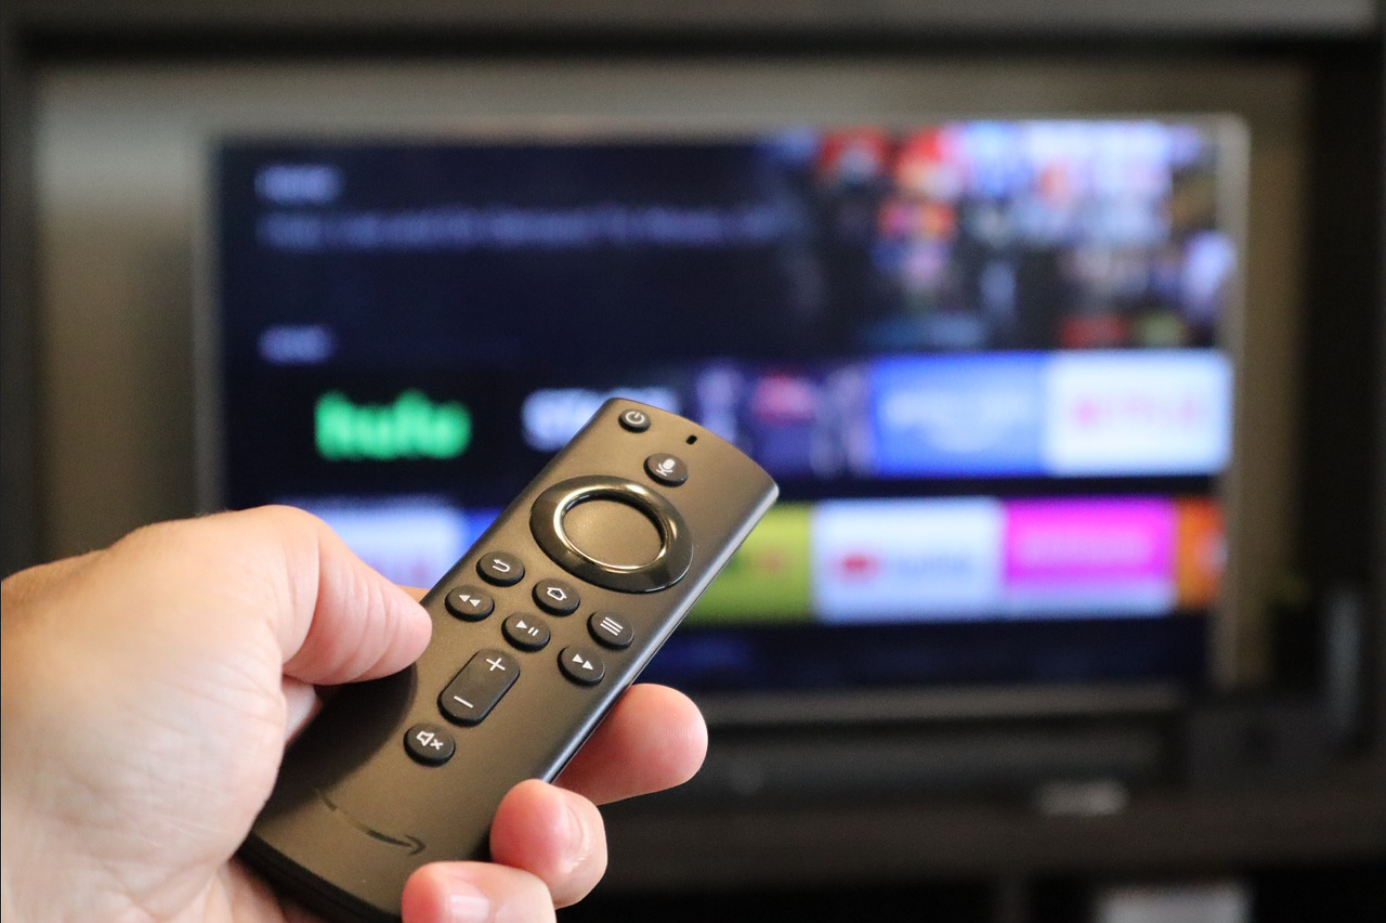 Can you use Firestick without remote